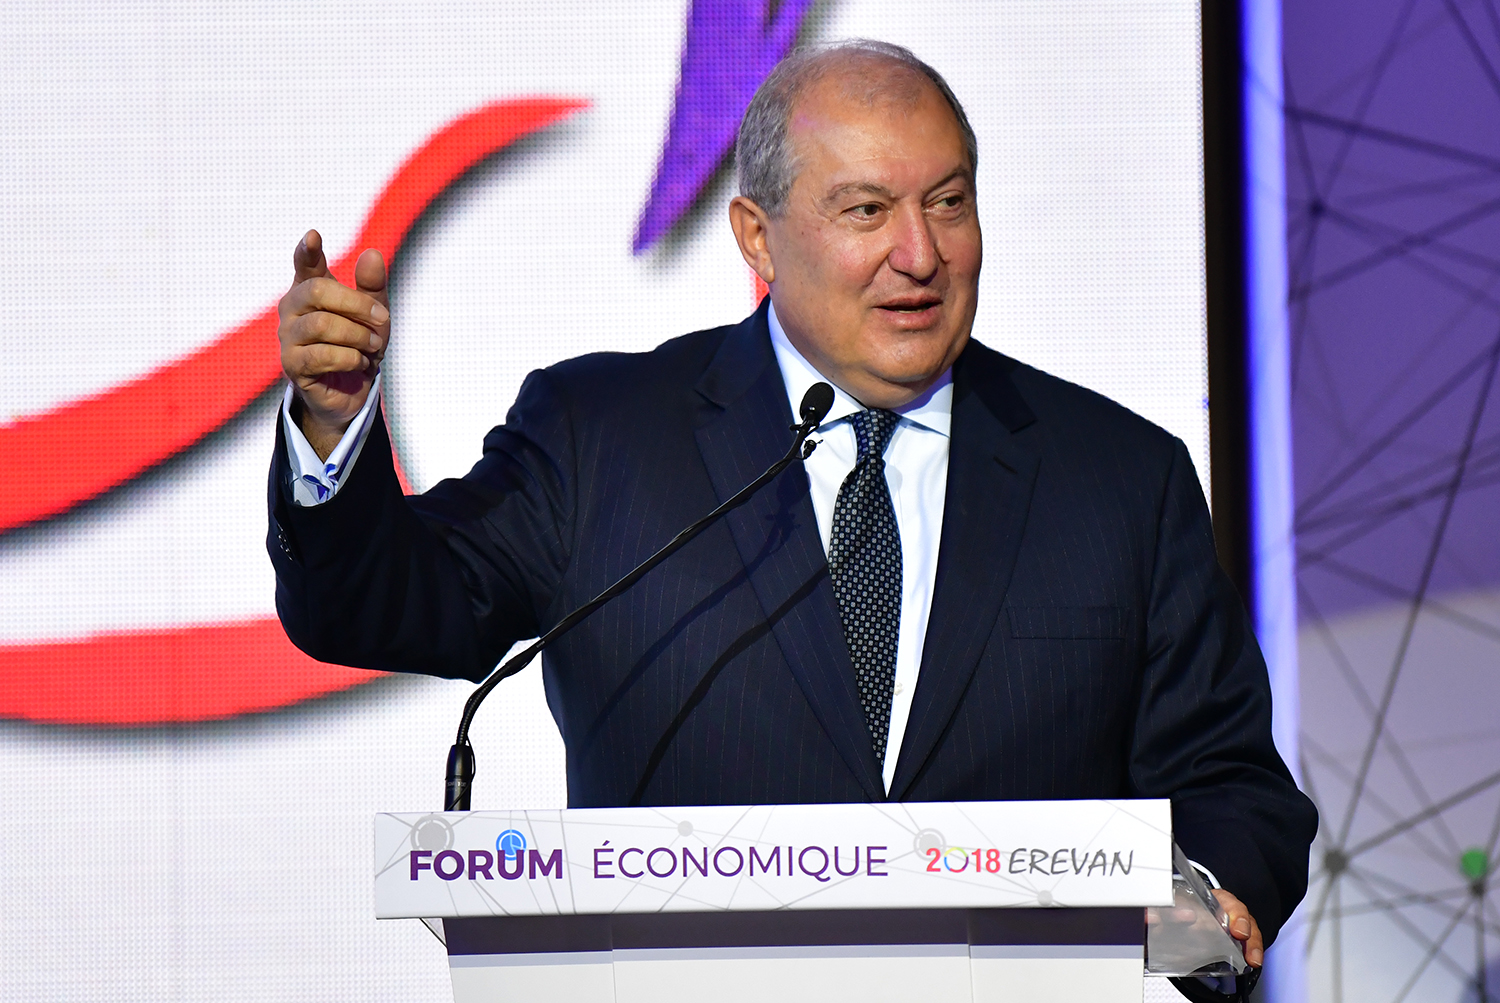 Armen Sarkissian: We can become an important part of the new world and the new Silk Road